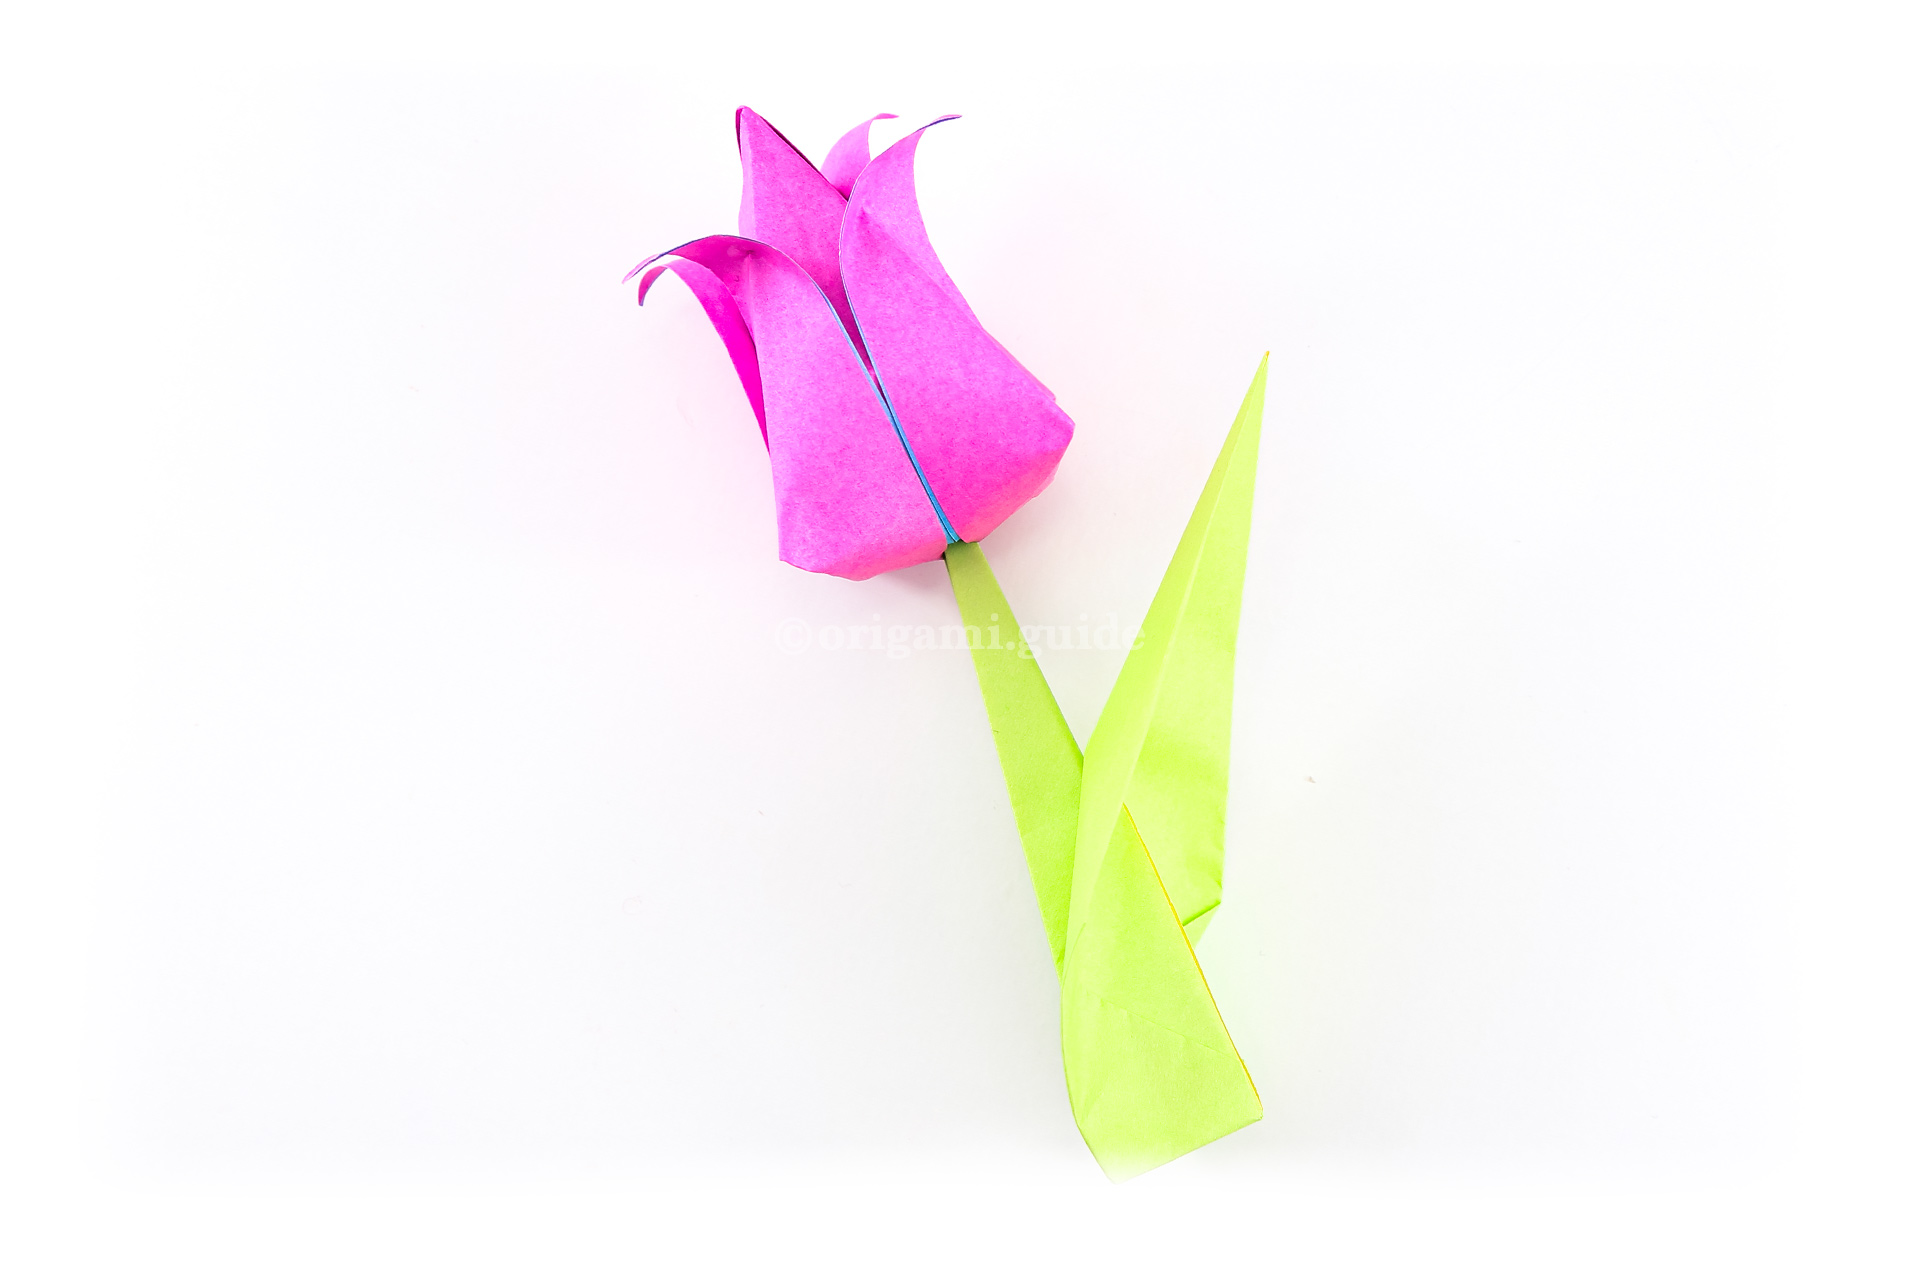 Finally you can insert the stem into your tulip flower. If you have trouble standing your tulip upright, you may need to use thinner paper, especially for the tulip. You can also re-position the the leaf to make a better balance.